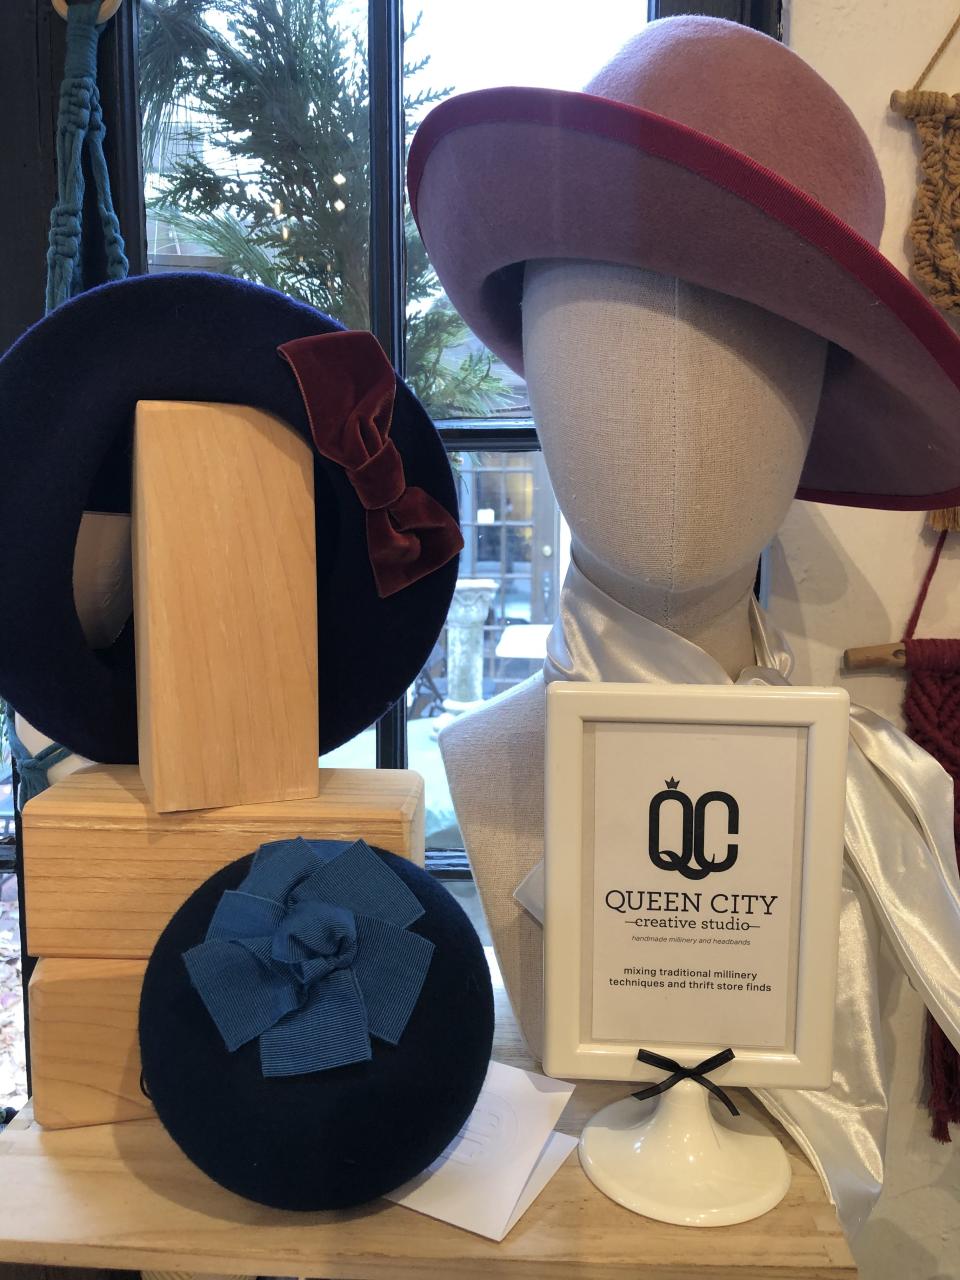 Teri Poindexter of Queen City Creative Studio makes hats using repurposed, thrifted or vintage items.